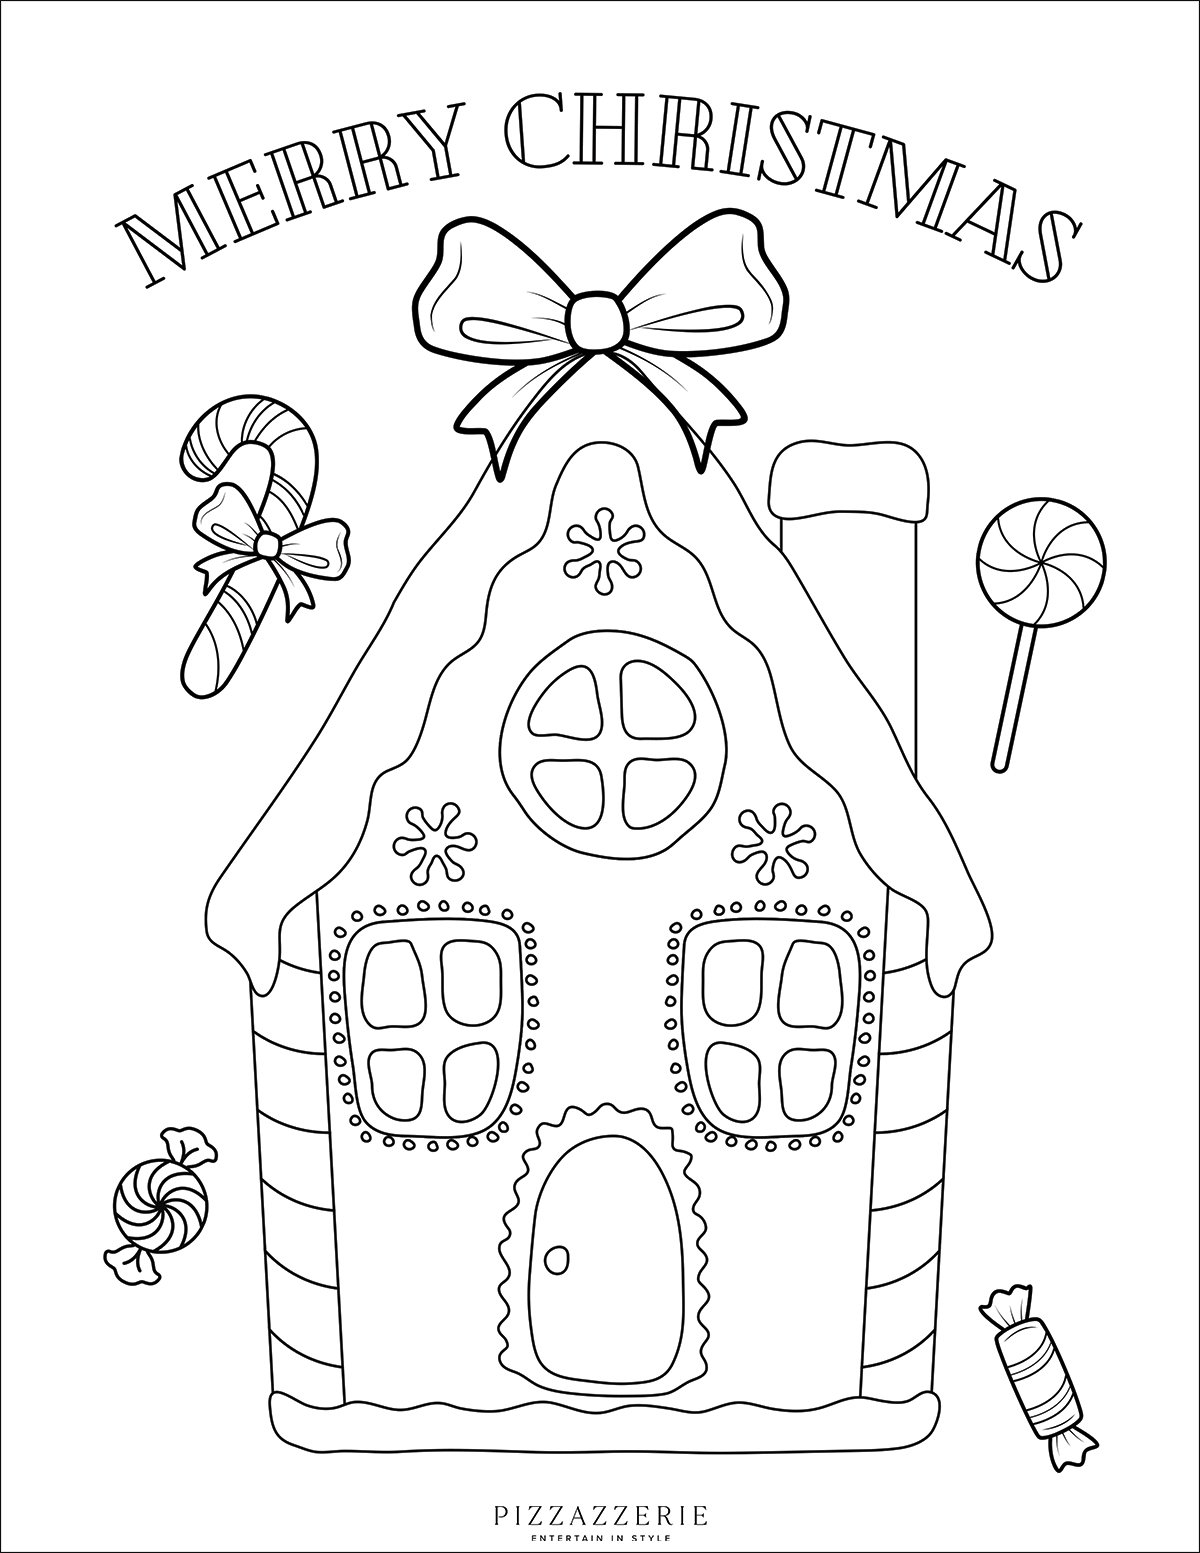 Gingerbread House Coloring Pages (Free Printable PDFs) - Pizzazzerie